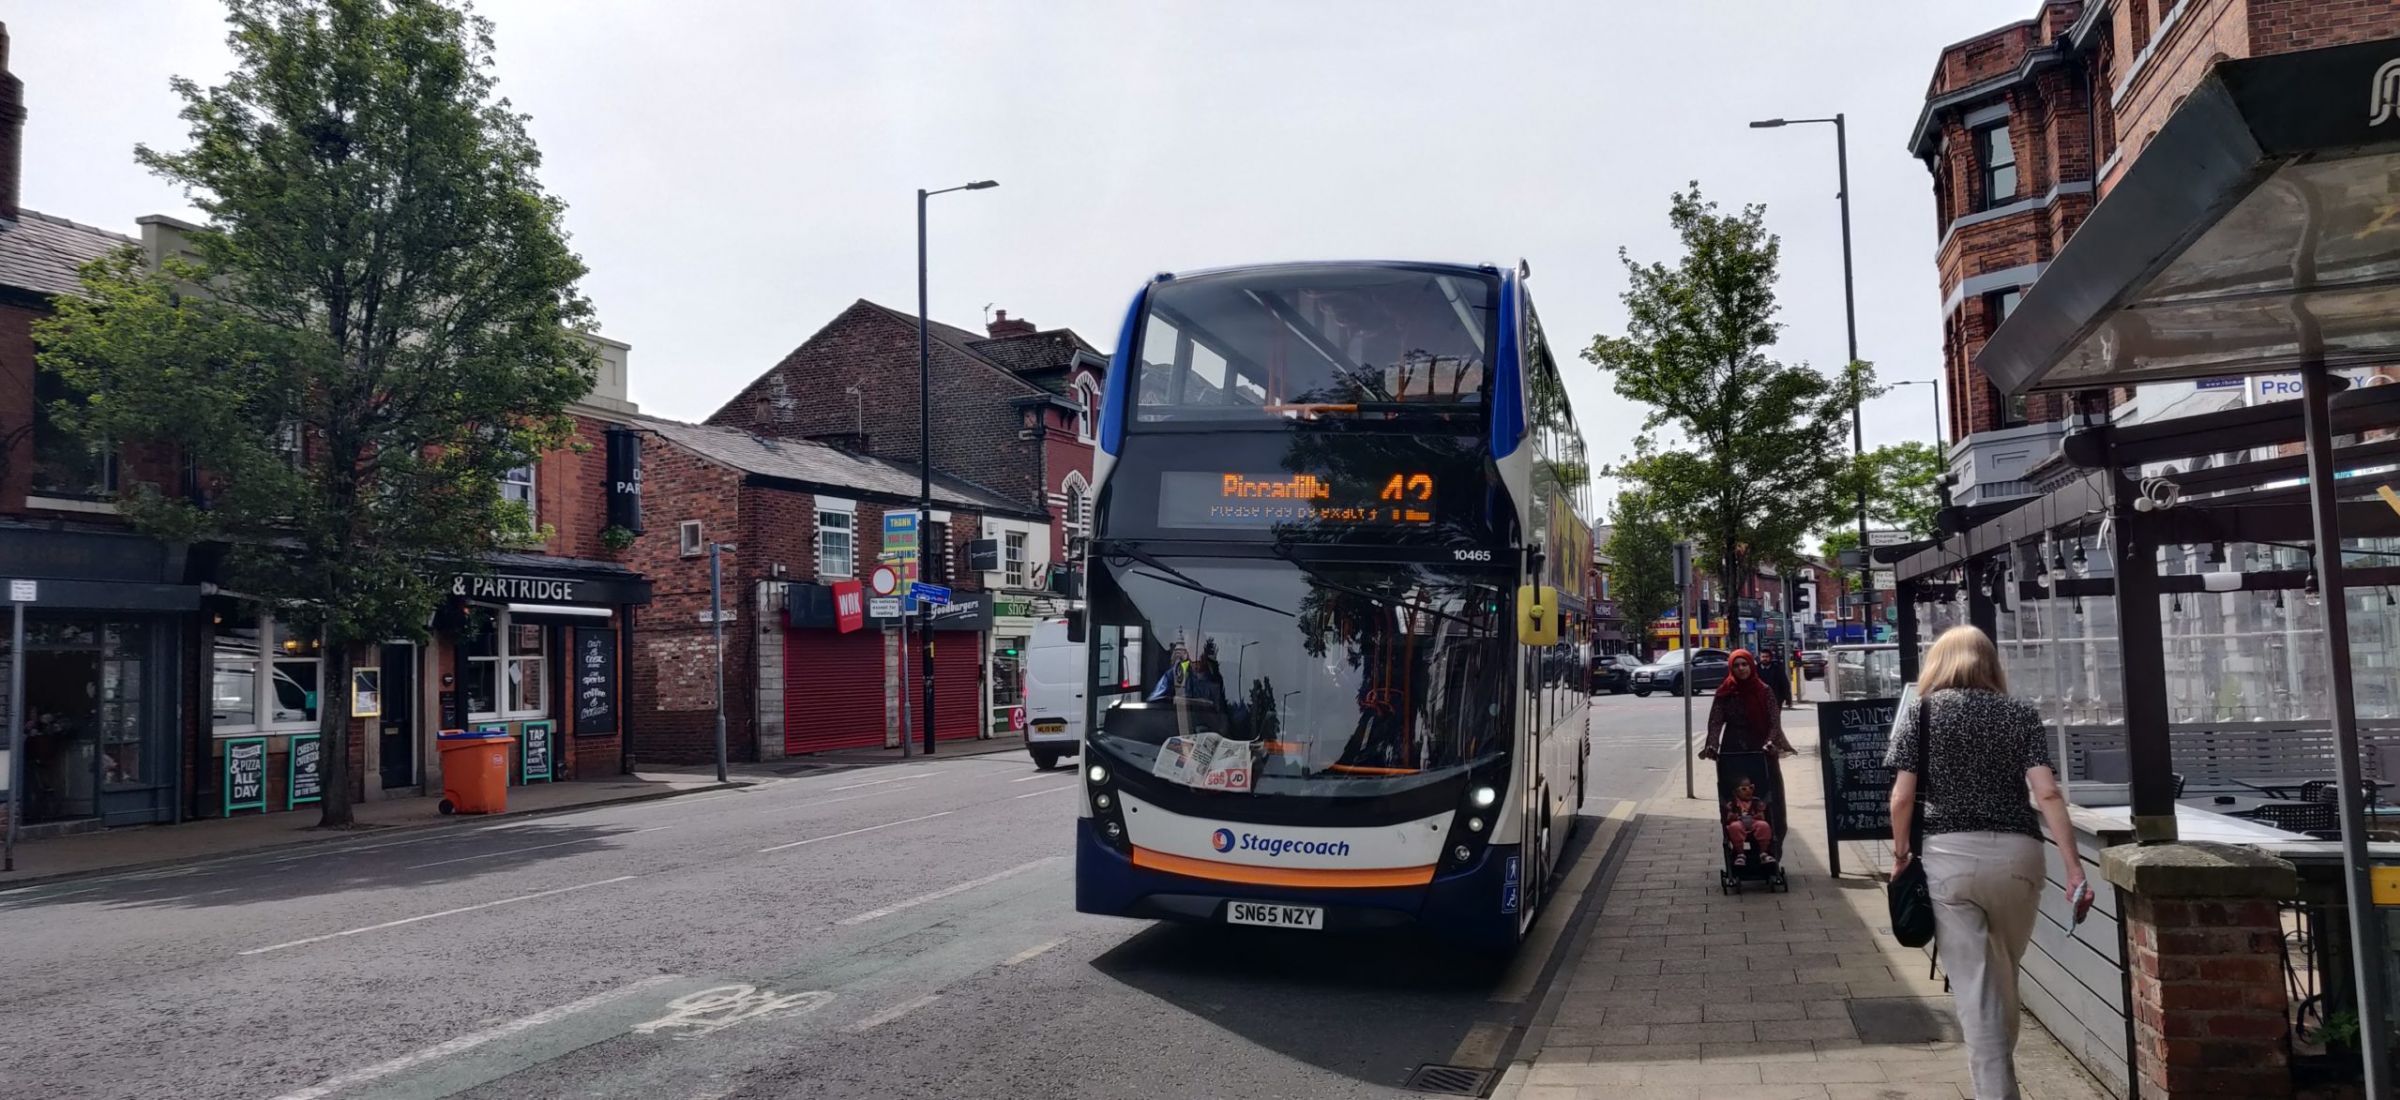 A photo of the 42 Stagecoach Bus